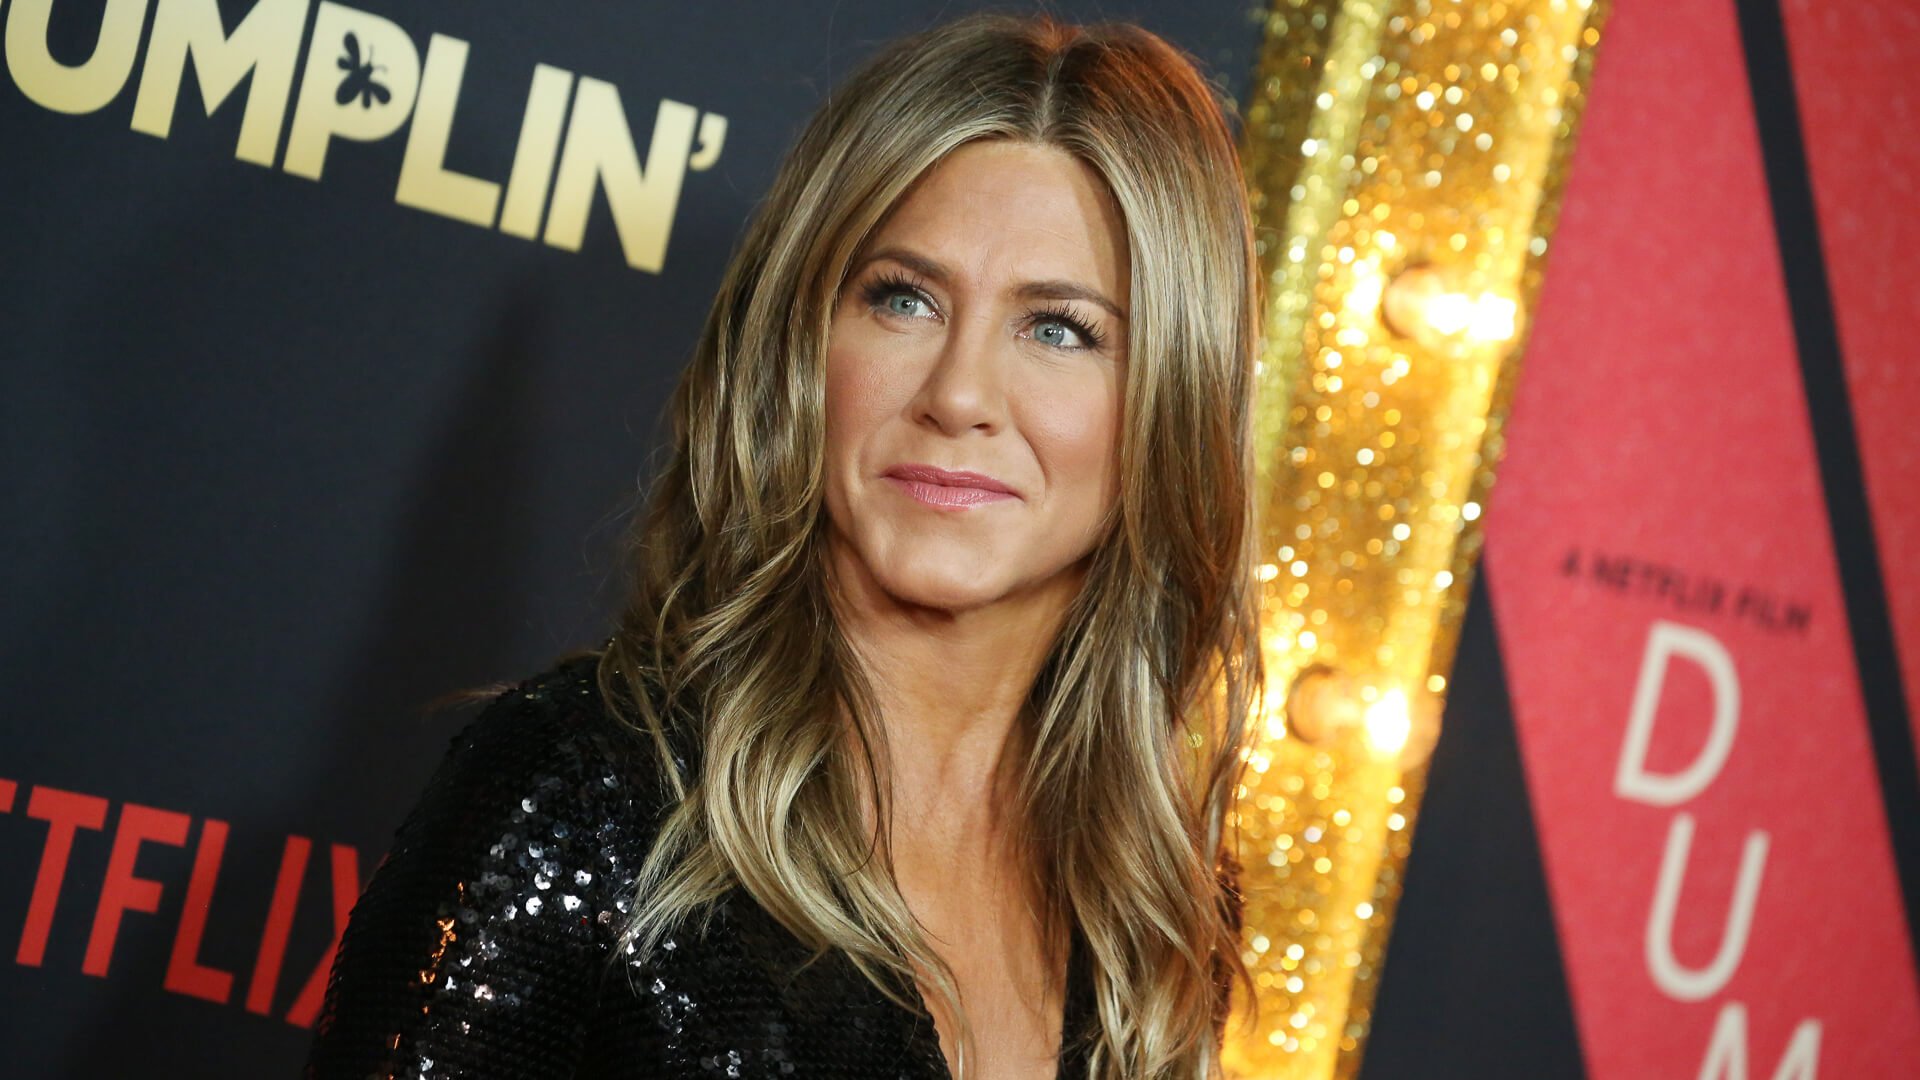 How rich are Jennifer Aniston, Tom Hanks and your favorite stars?